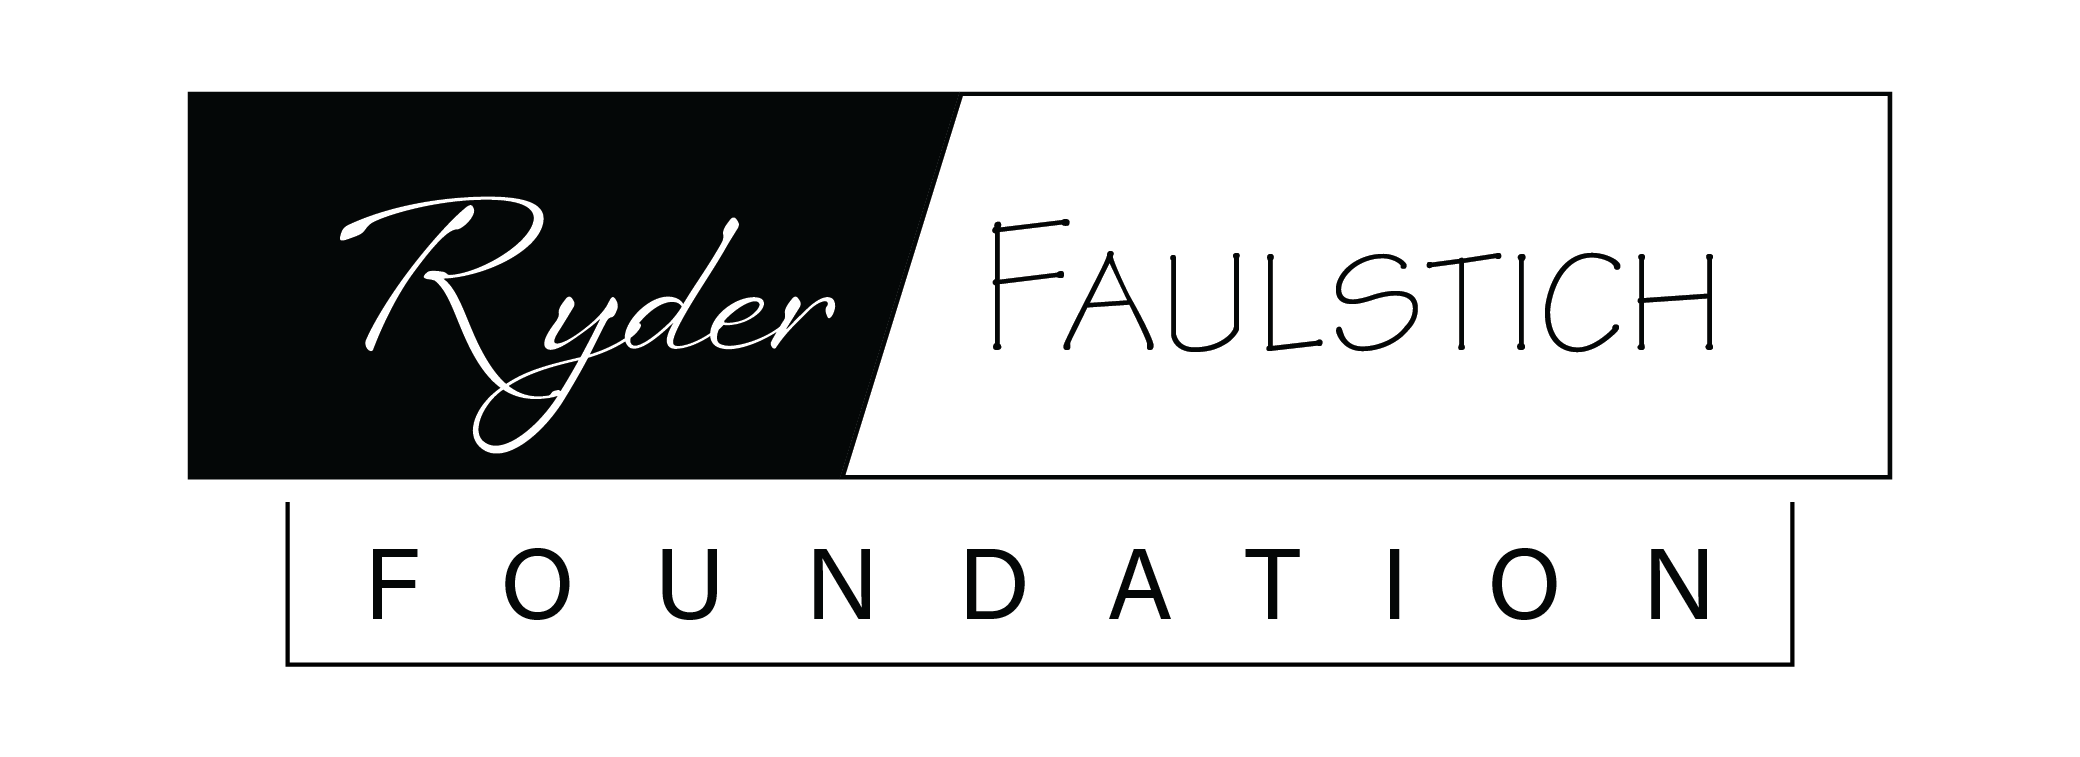 The Ryder-Faulstich Foundation